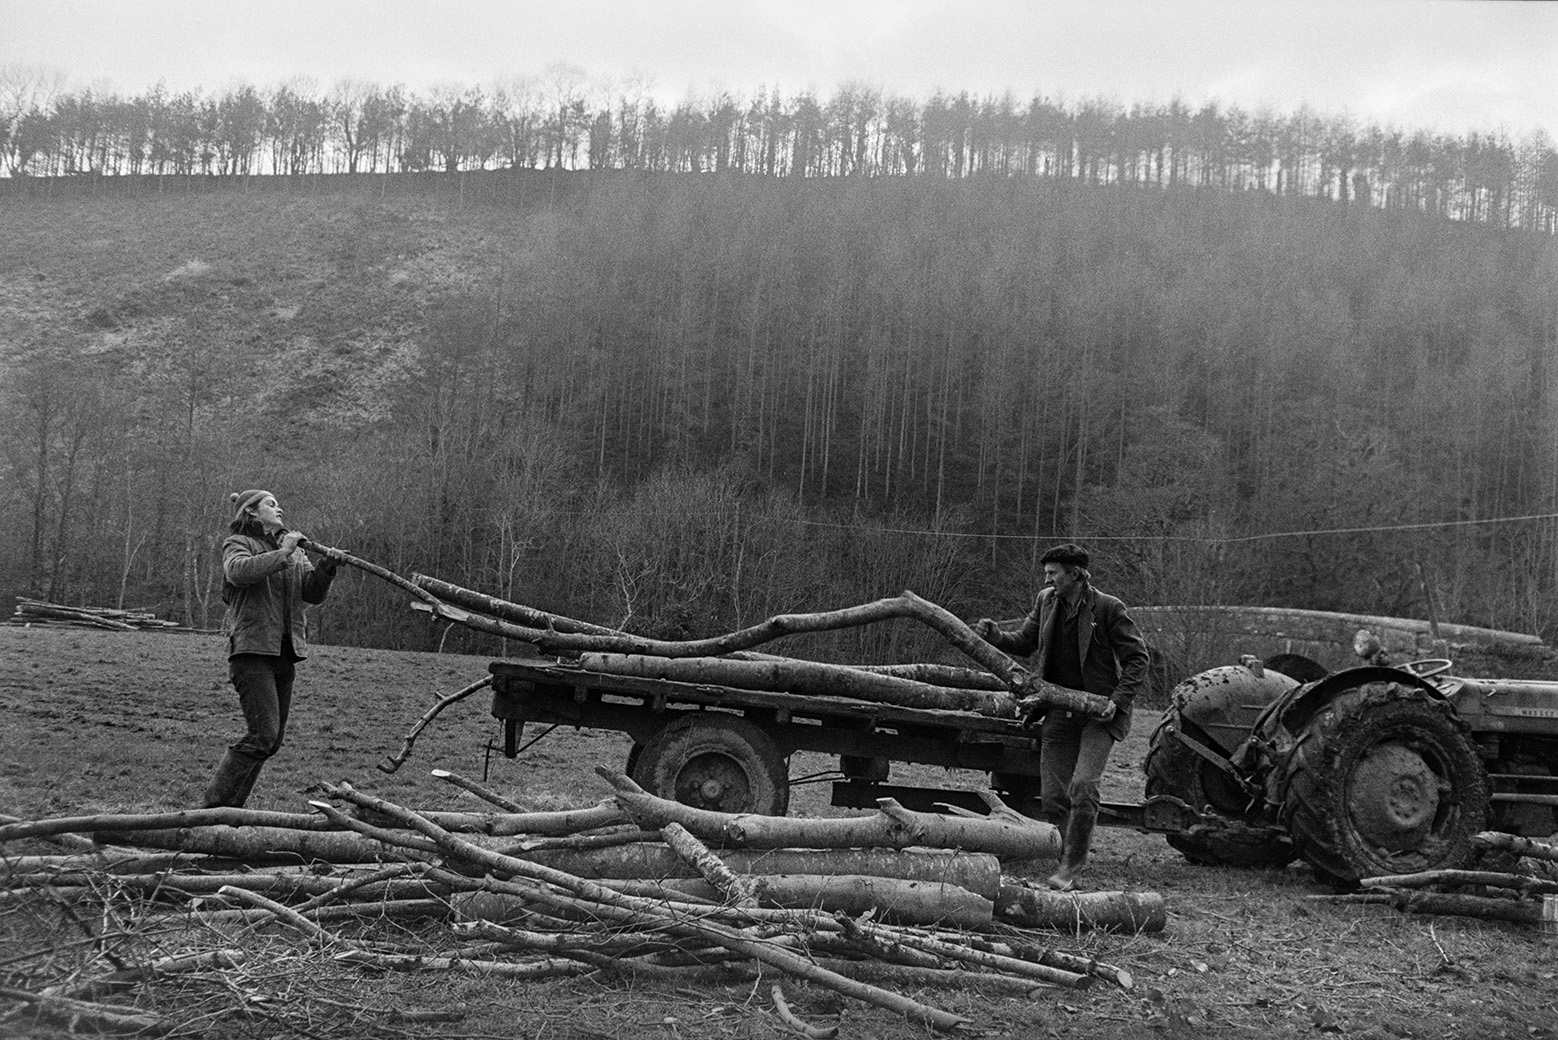 Derek Bright  and Ivor Bourne loading logs from felled trees onto a trailer in a field at Mill Road Farm, Beaford near Beaford Bridge. Woodland is visible on the hillside in the background. The farm was also known as Jeffrys.